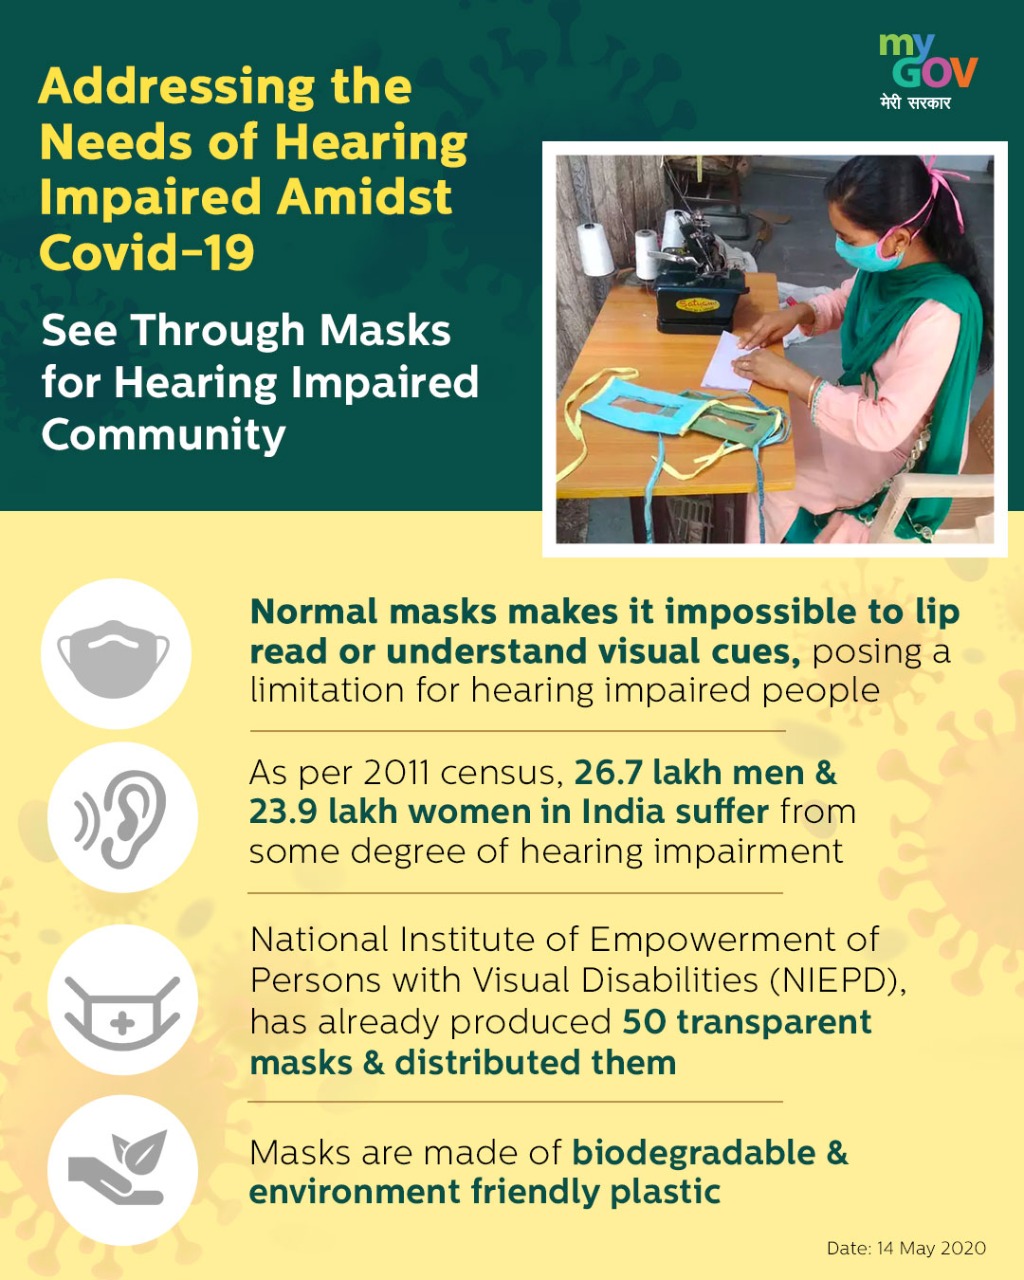 See through Masks for Hearing Impaired Community